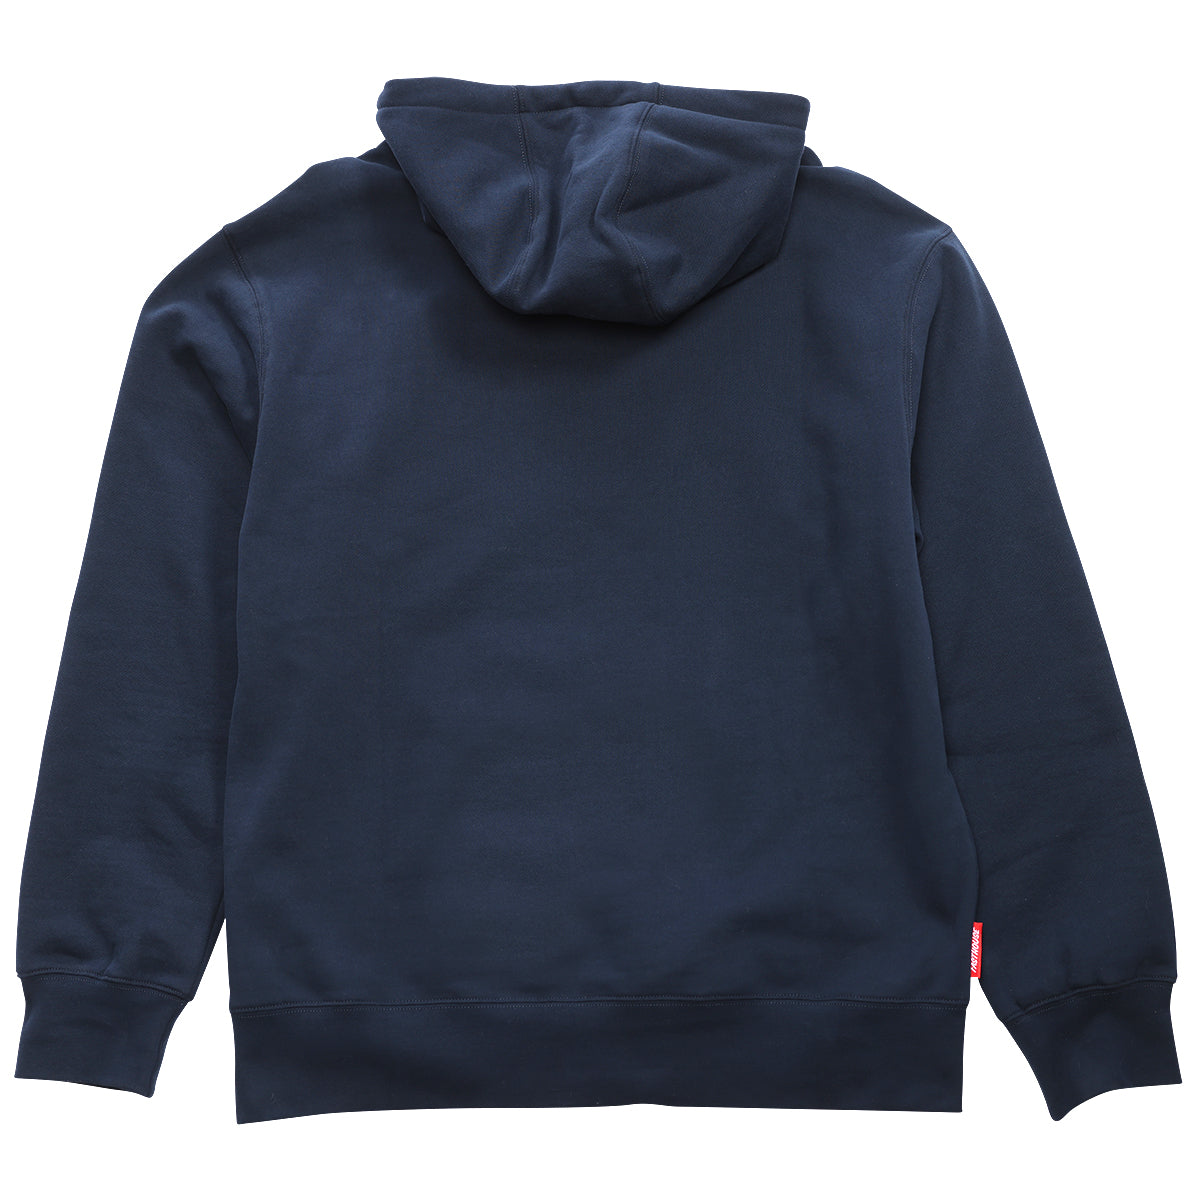 Paragon Hooded Pullover - Navy